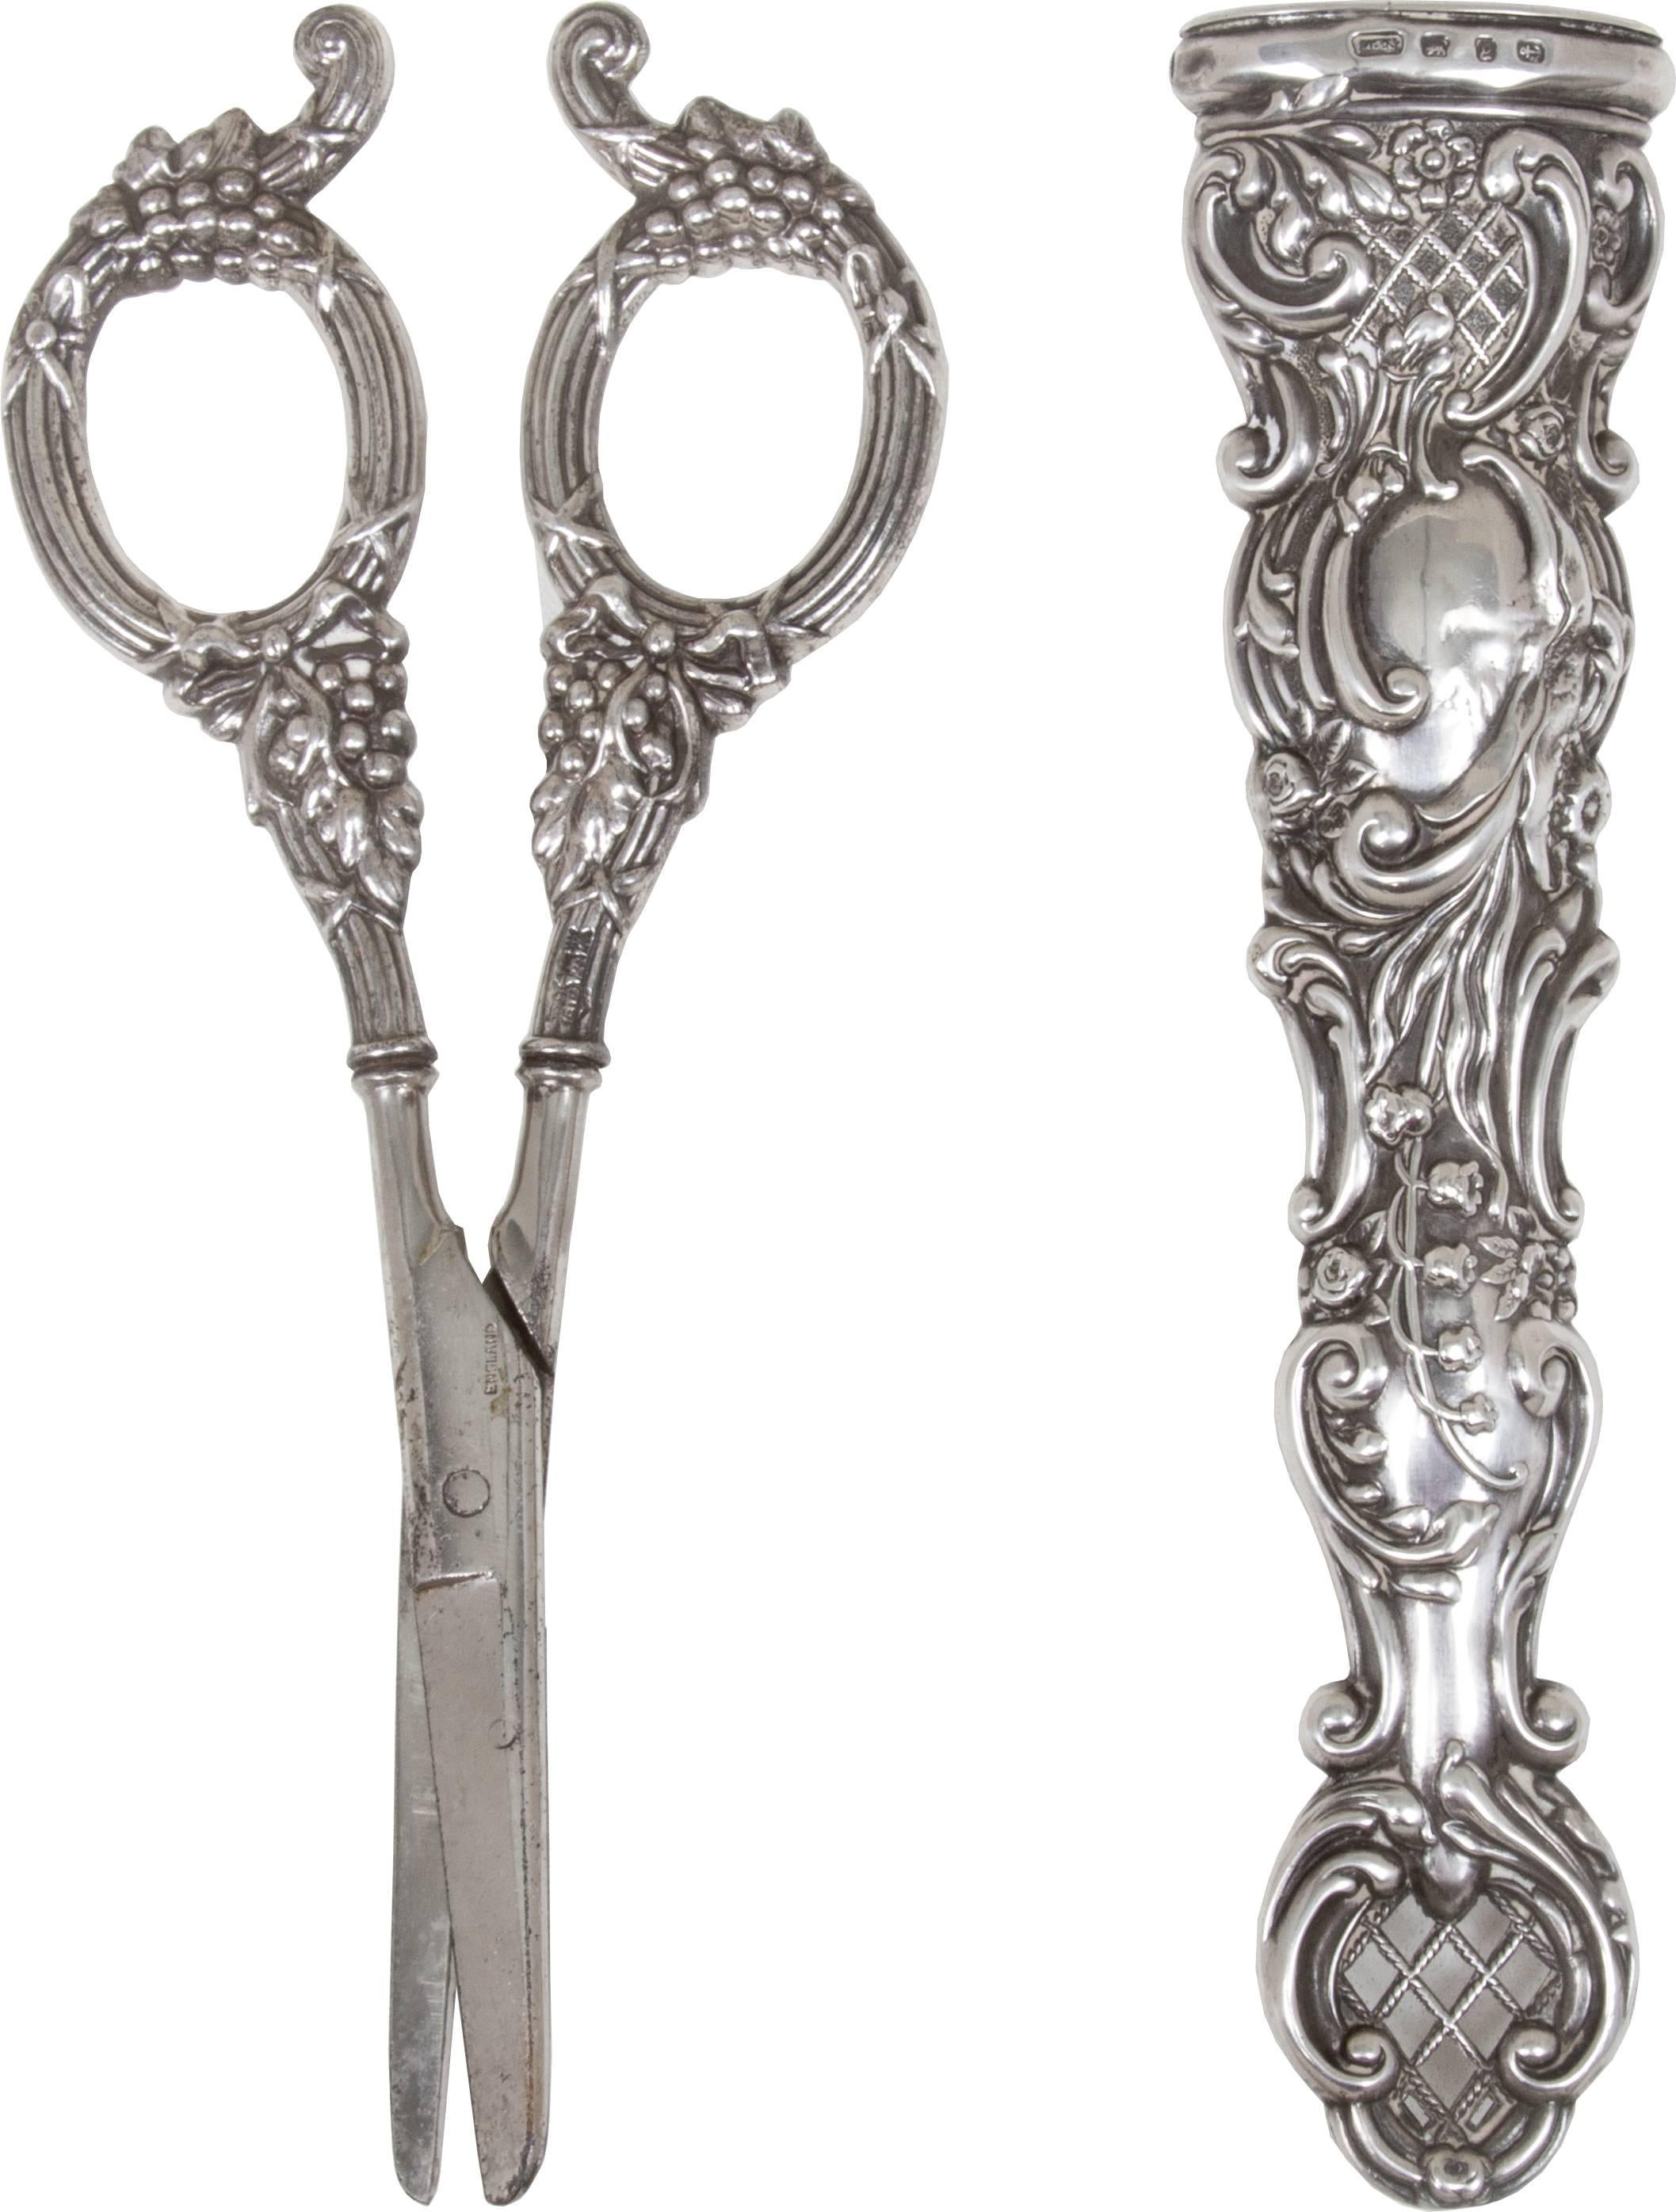 Aesthetic Movement Victorian Ornate Silver Grapeshears In Excellent Condition For Sale In Chicago, IL